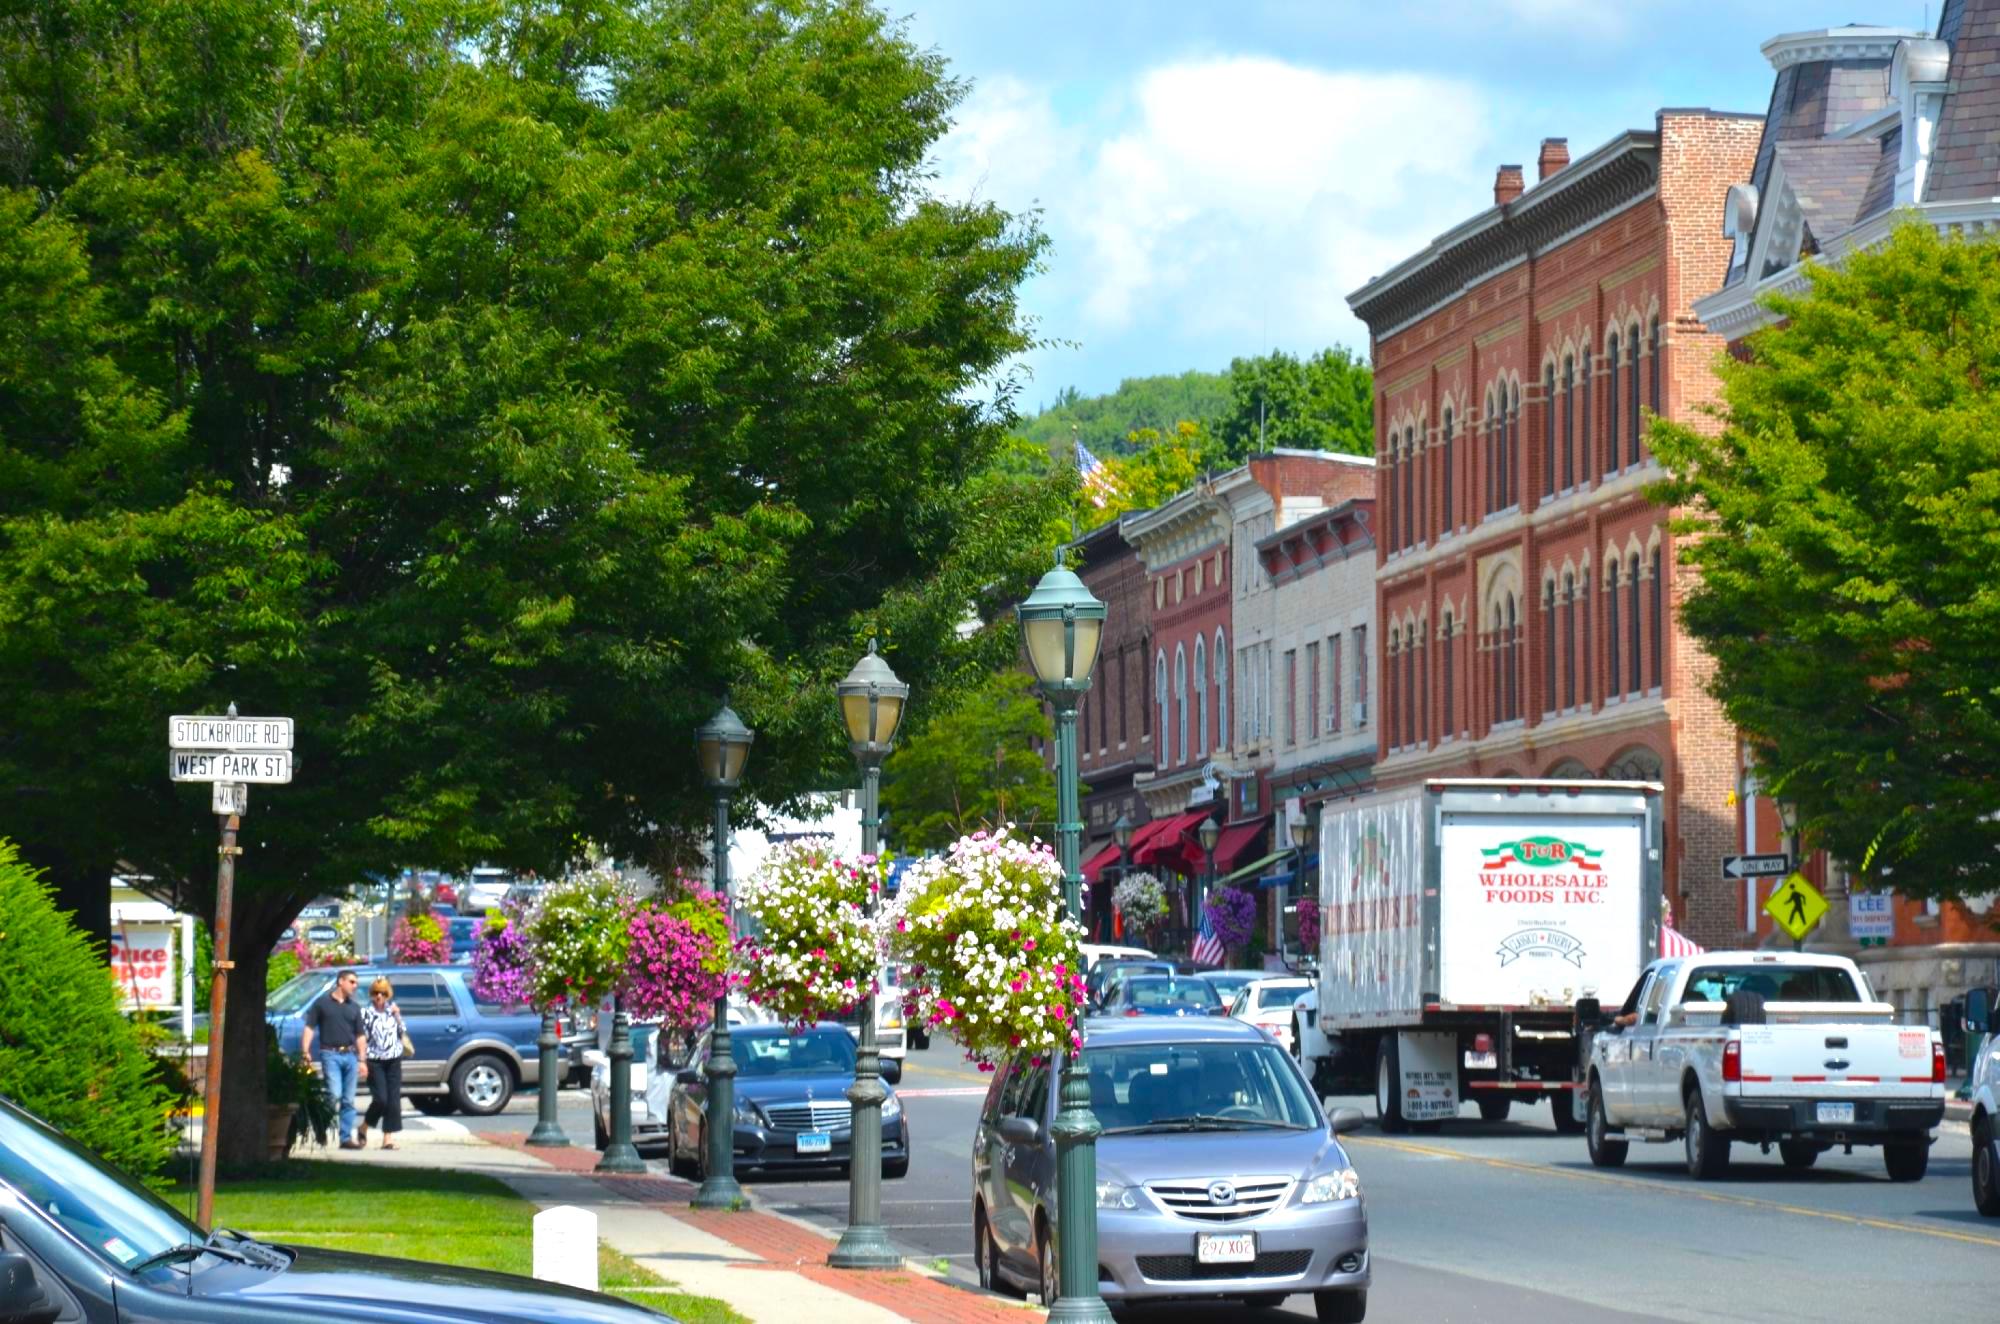 Lee Is A Small Massachusetts Town With Plenty To Do